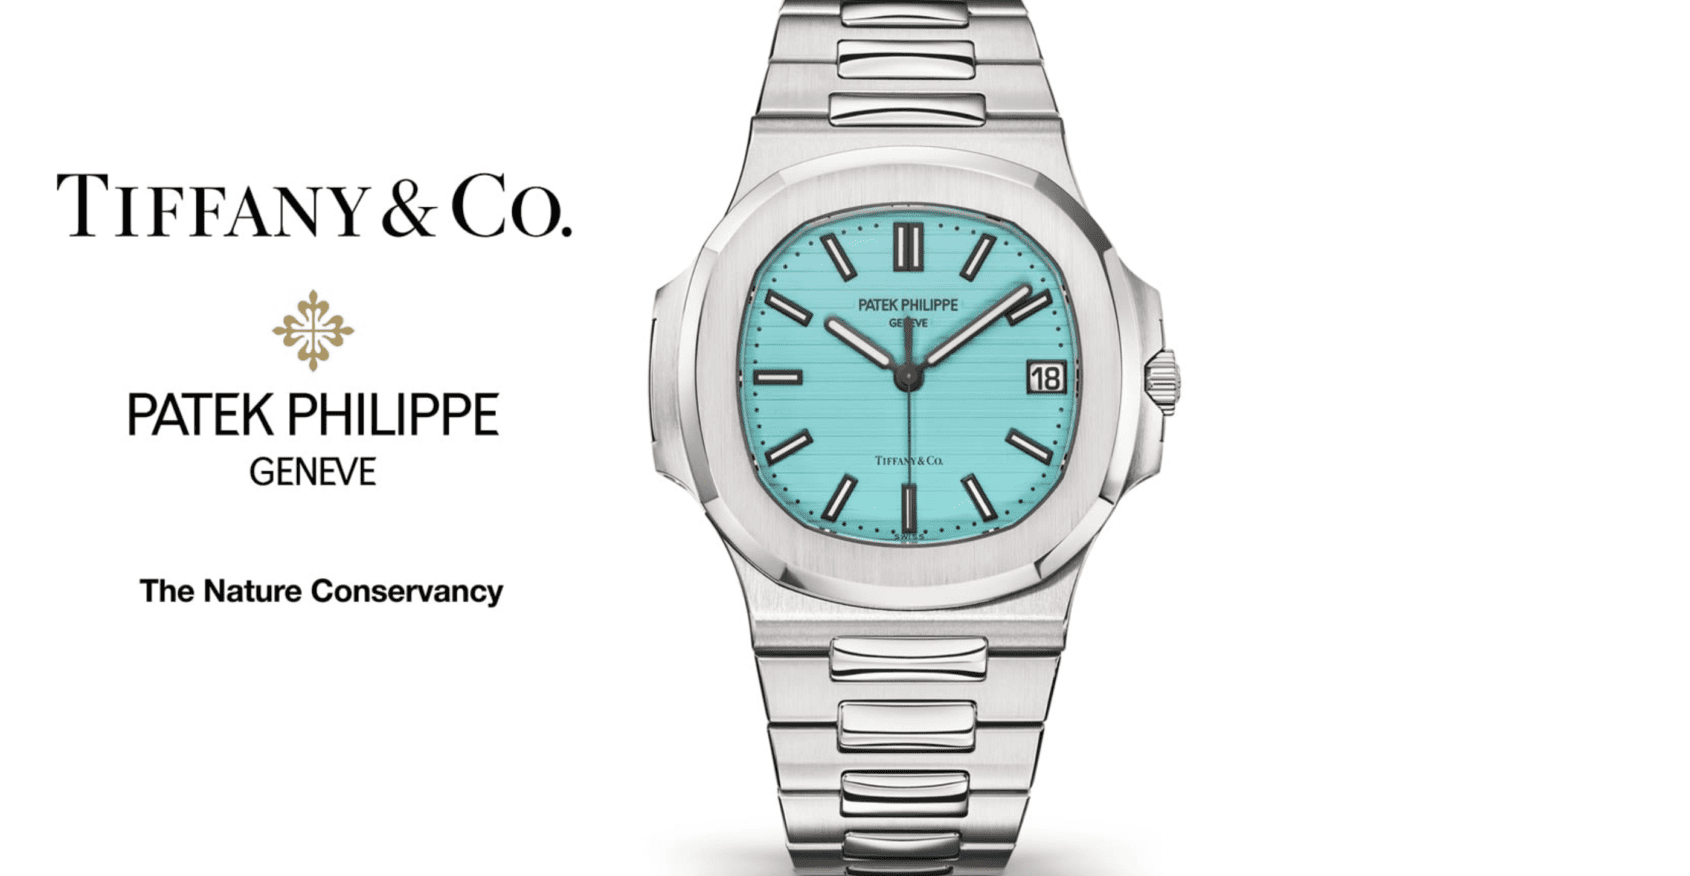 Tiffany Blue Nautilus 5711/1A-018 sold at Phillips for $6,503,500 USD